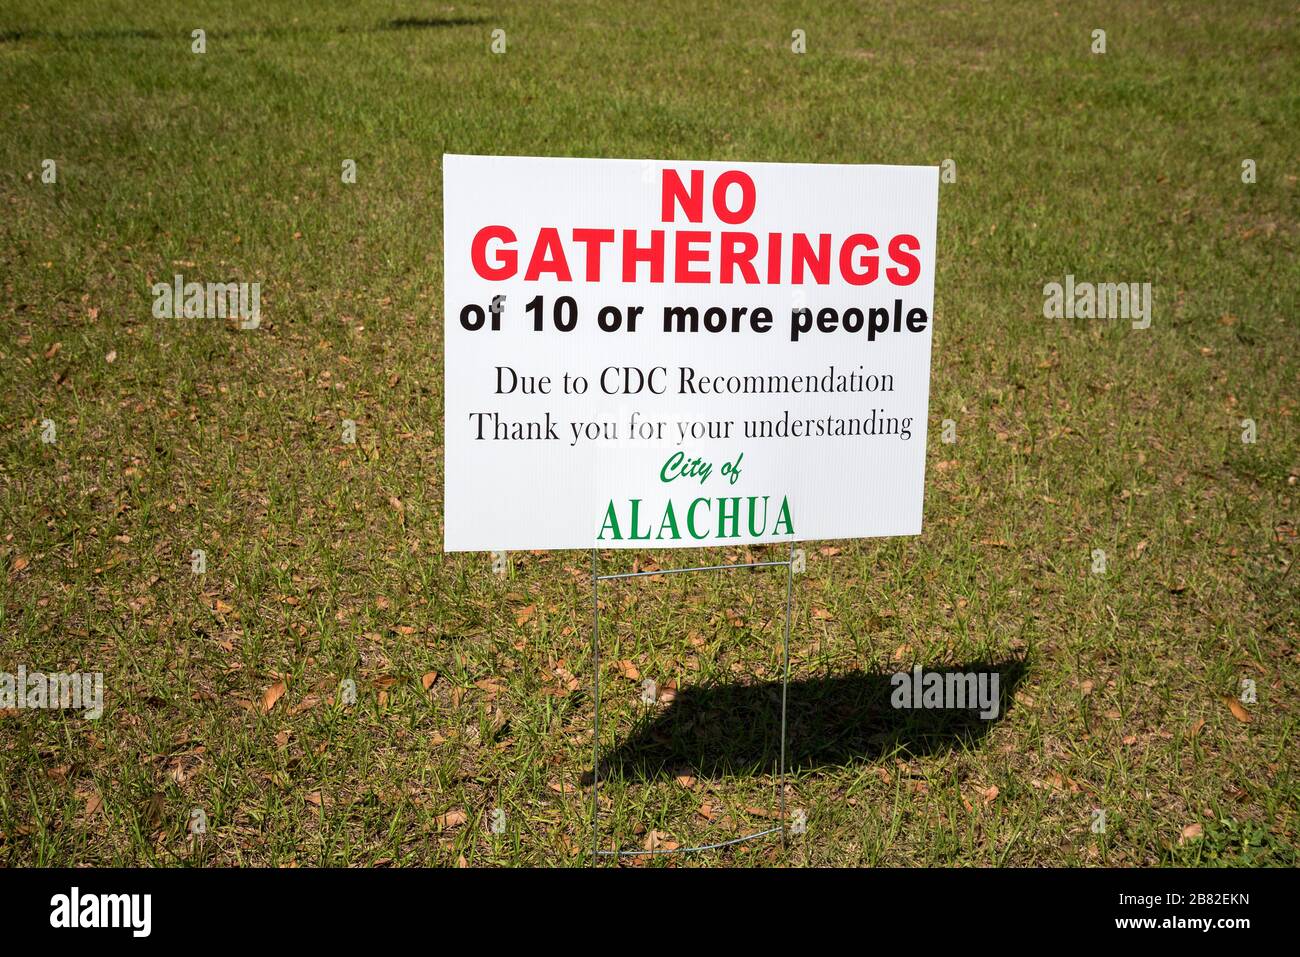 Restricted gathering of people sign at a public park in Alachua, Florida, due to the coronavirus threat. Stock Photo